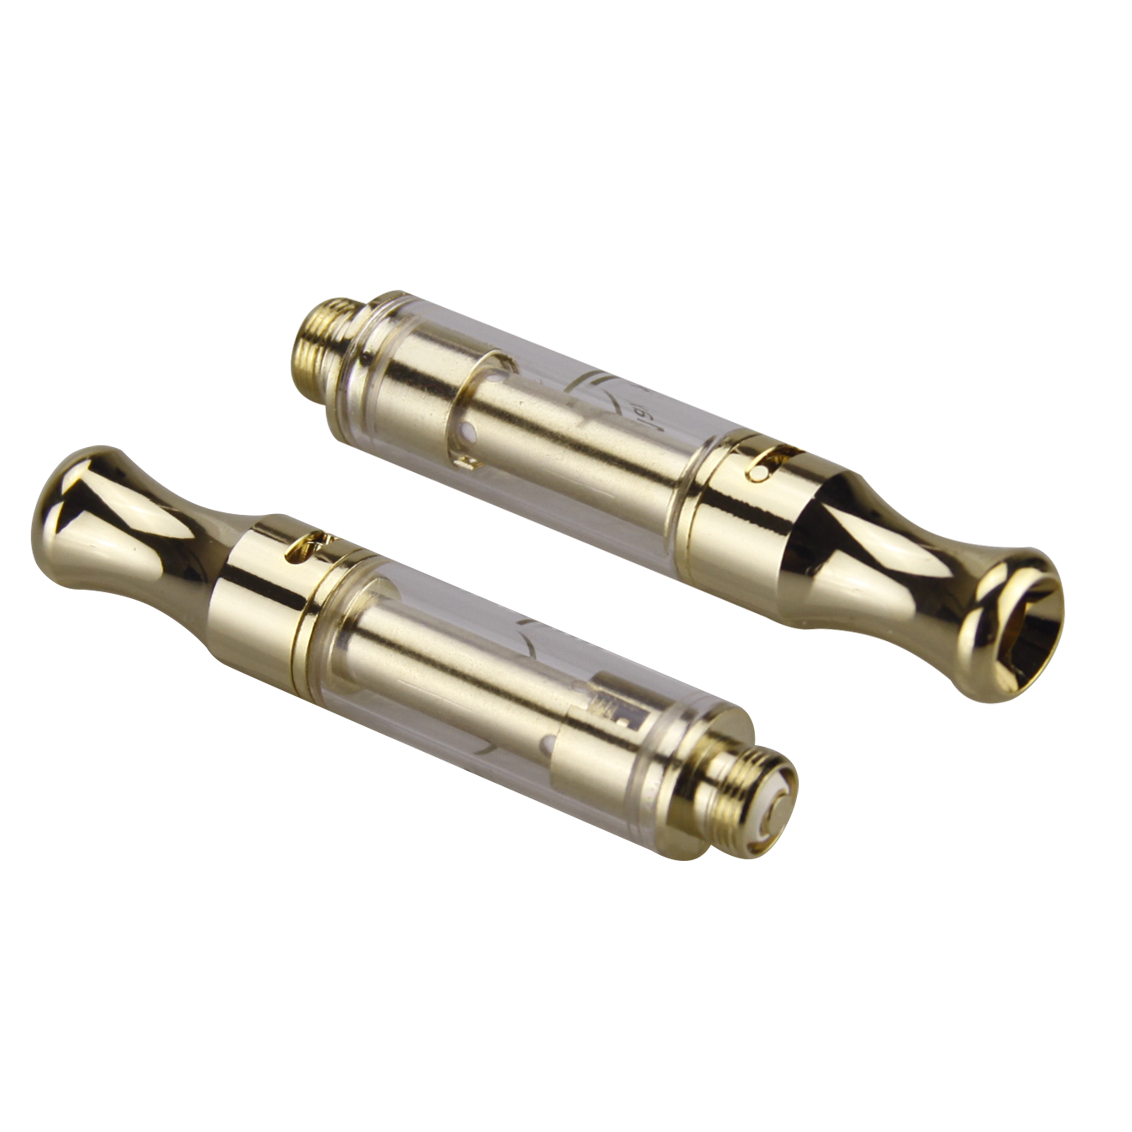 Gold 1 ml DM 009 510 thread vape cartridge with a green max fill line graduated onto the barrel and adjustable airflow port